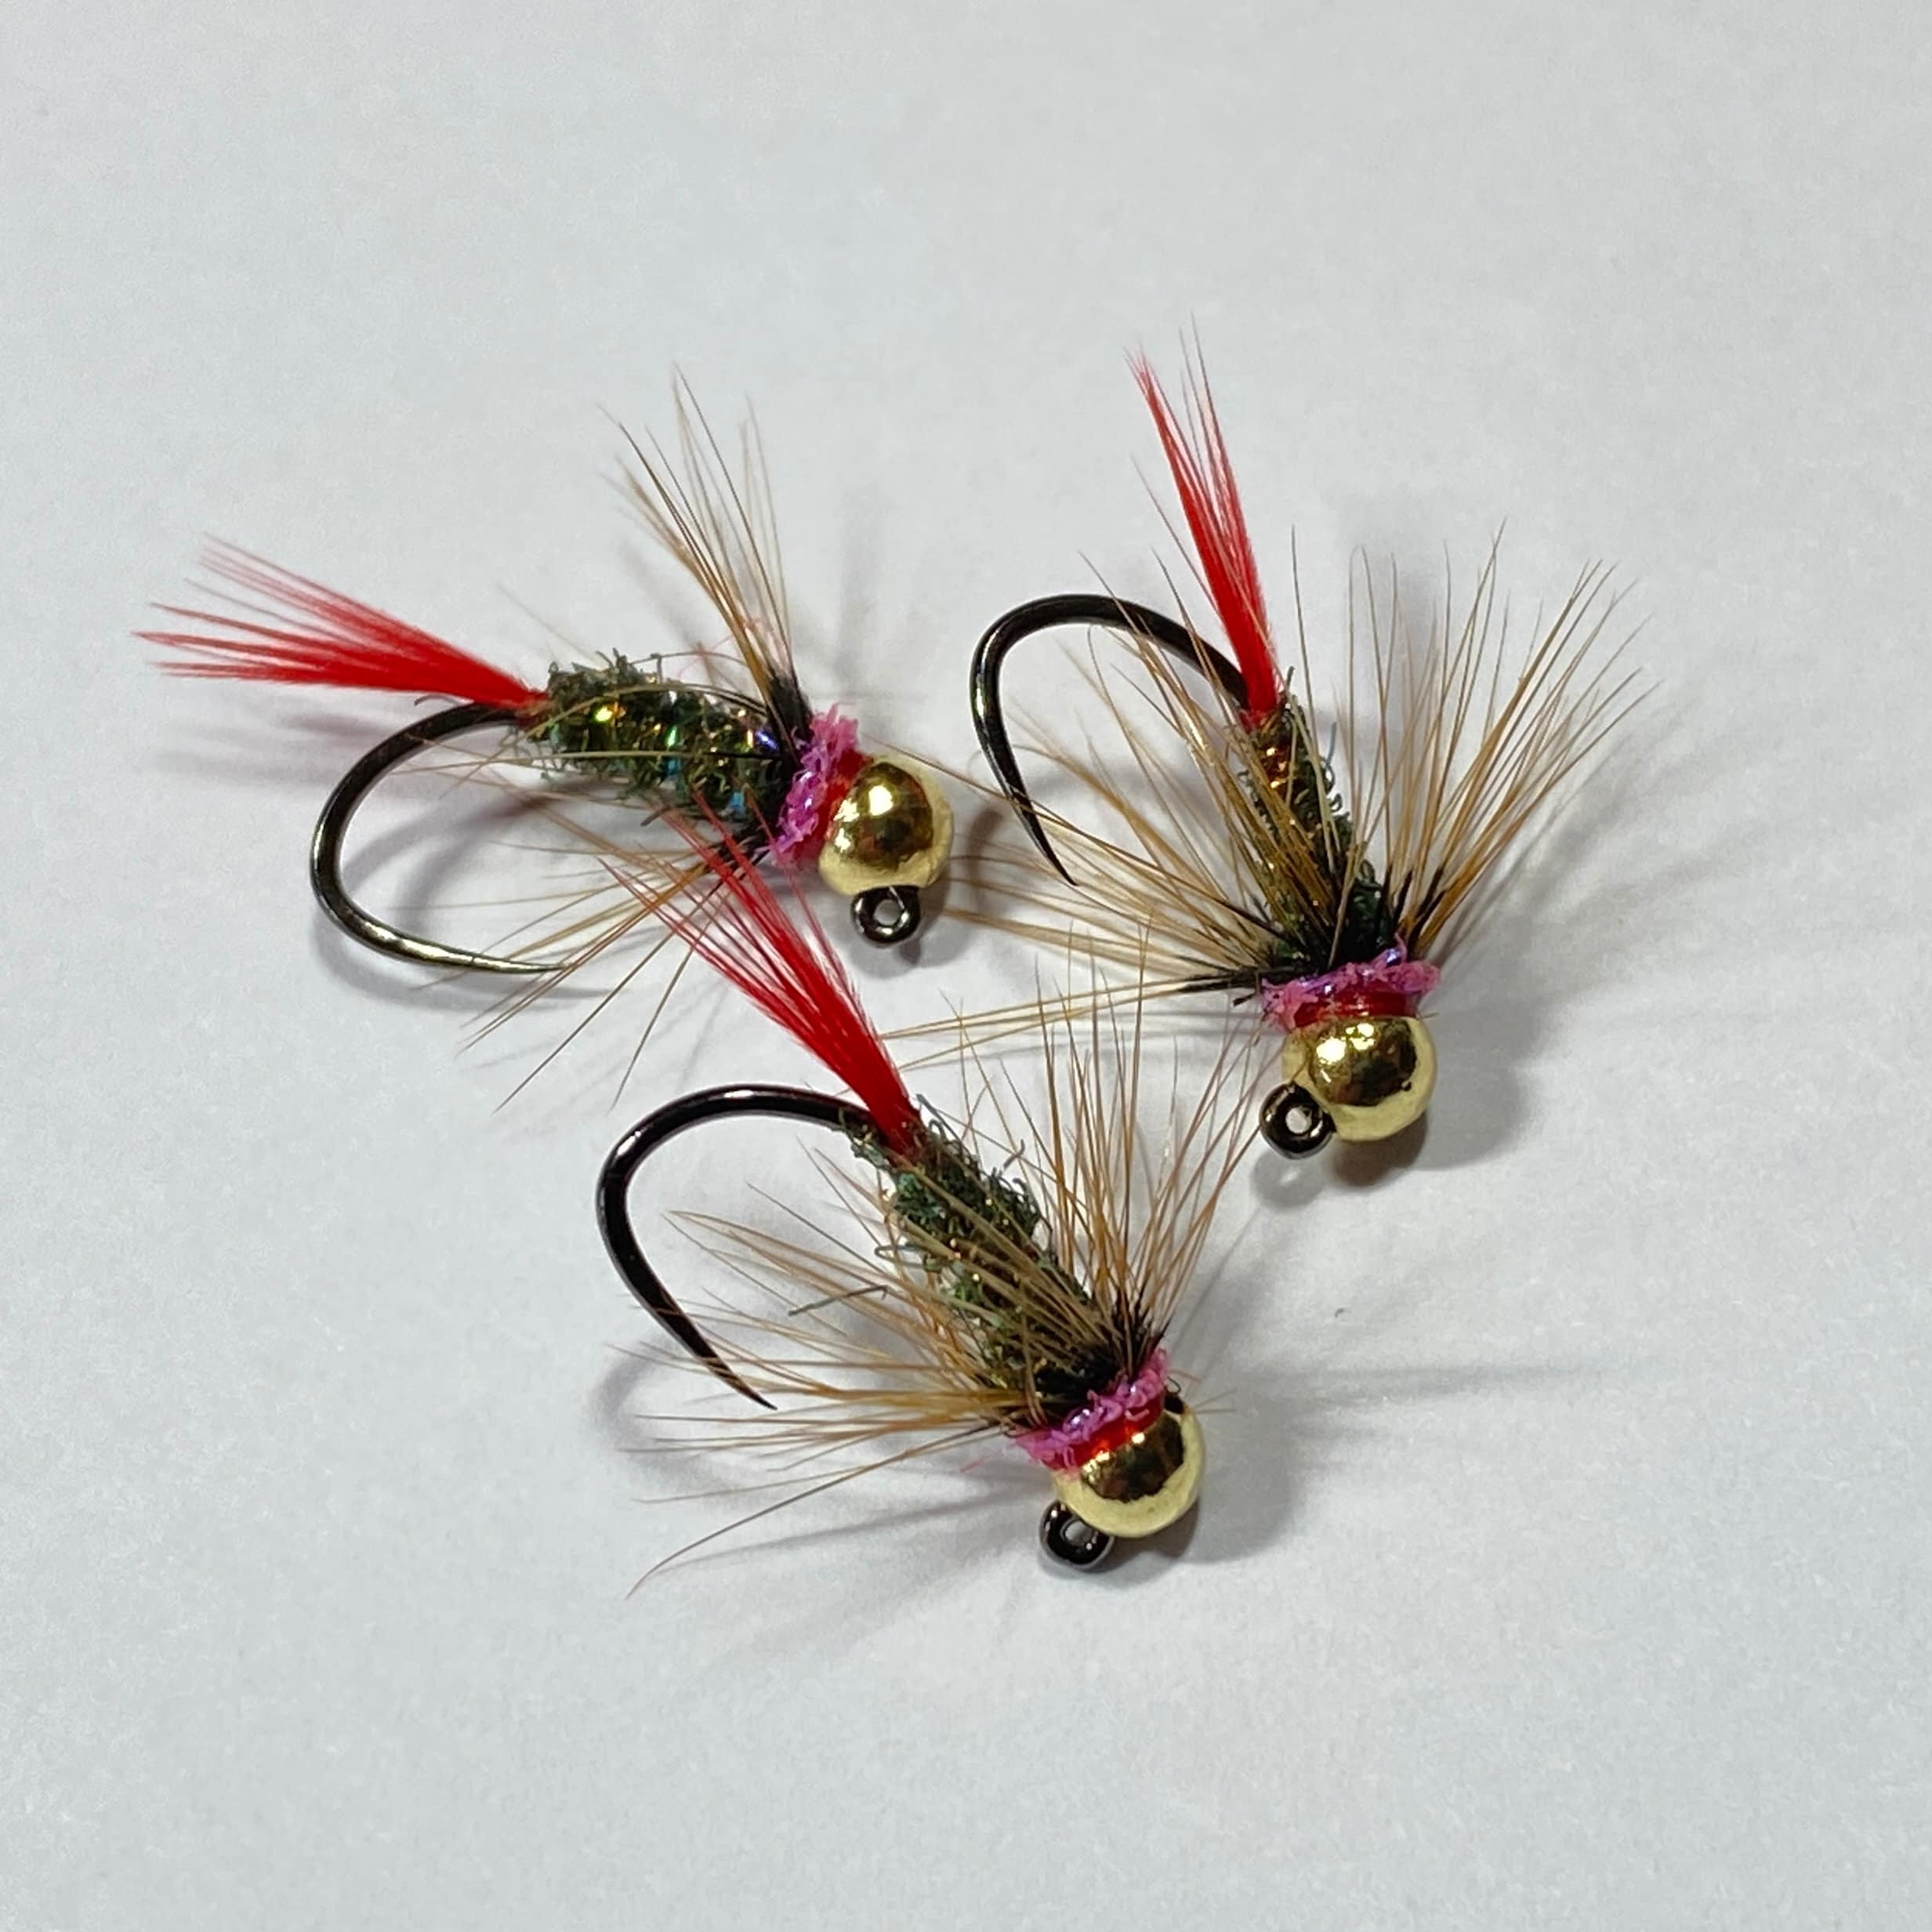 Red Dart Fly. One of the BEST Fly Fishing Flies. Great Euro Nymph 